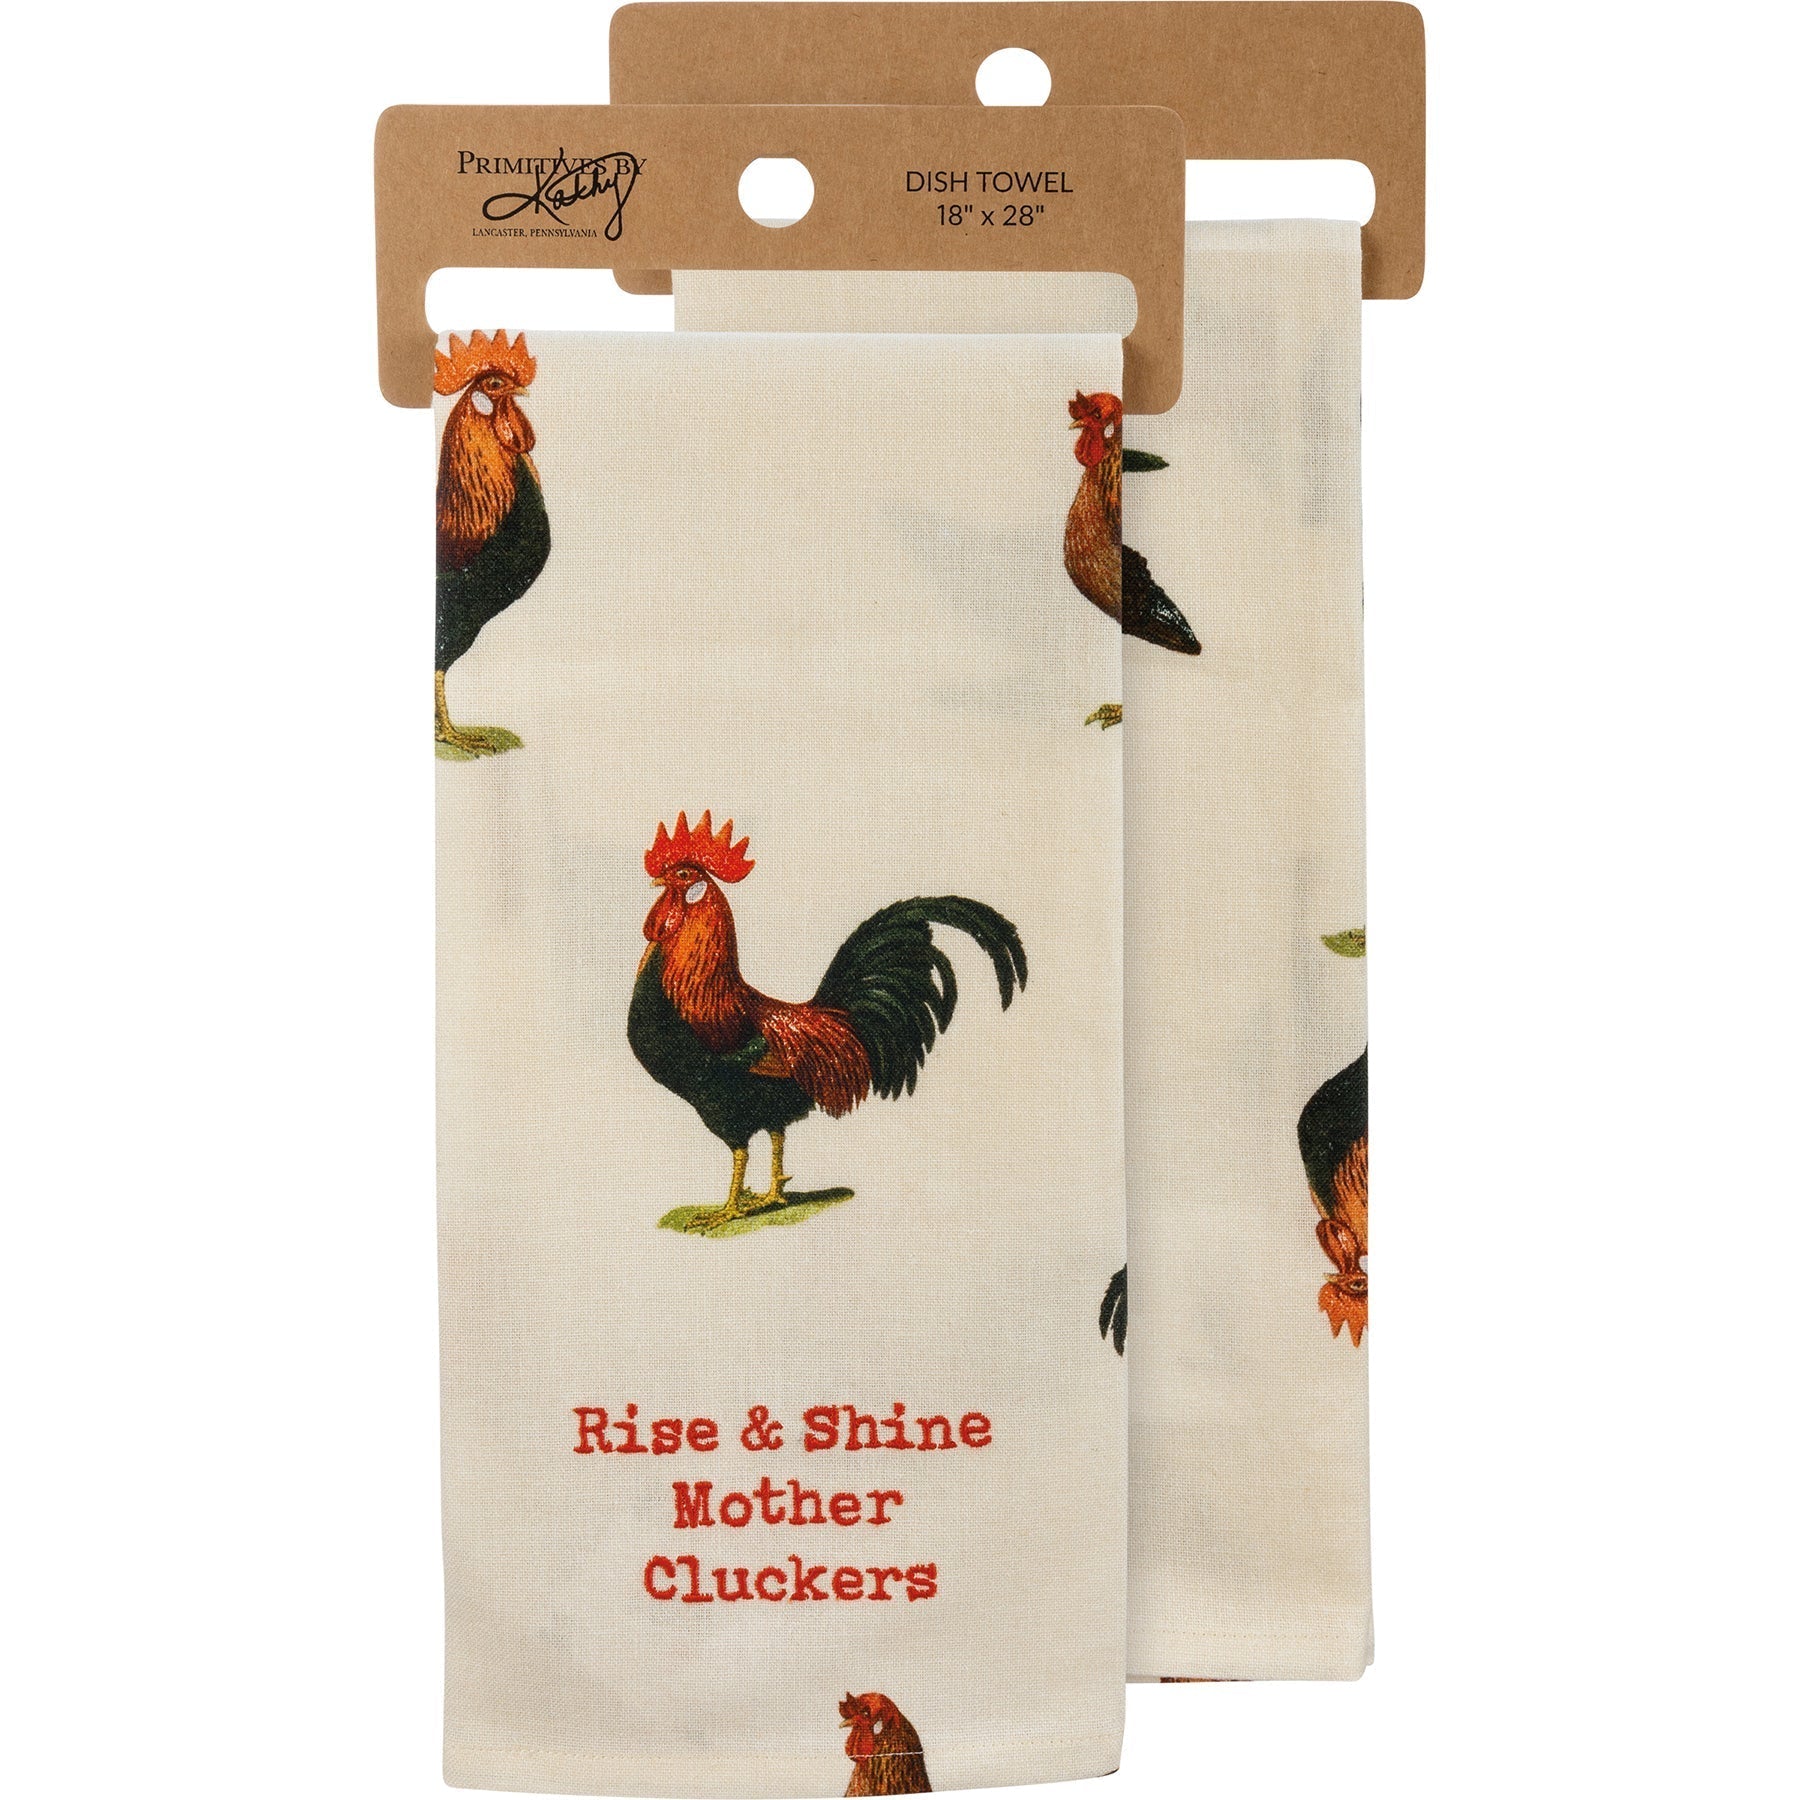 Rise & Shine Mother Cluckers Dish Cloth Towel | Cotten Linen Novelty Tea Towel | Embroidered Text | 18" x 28"